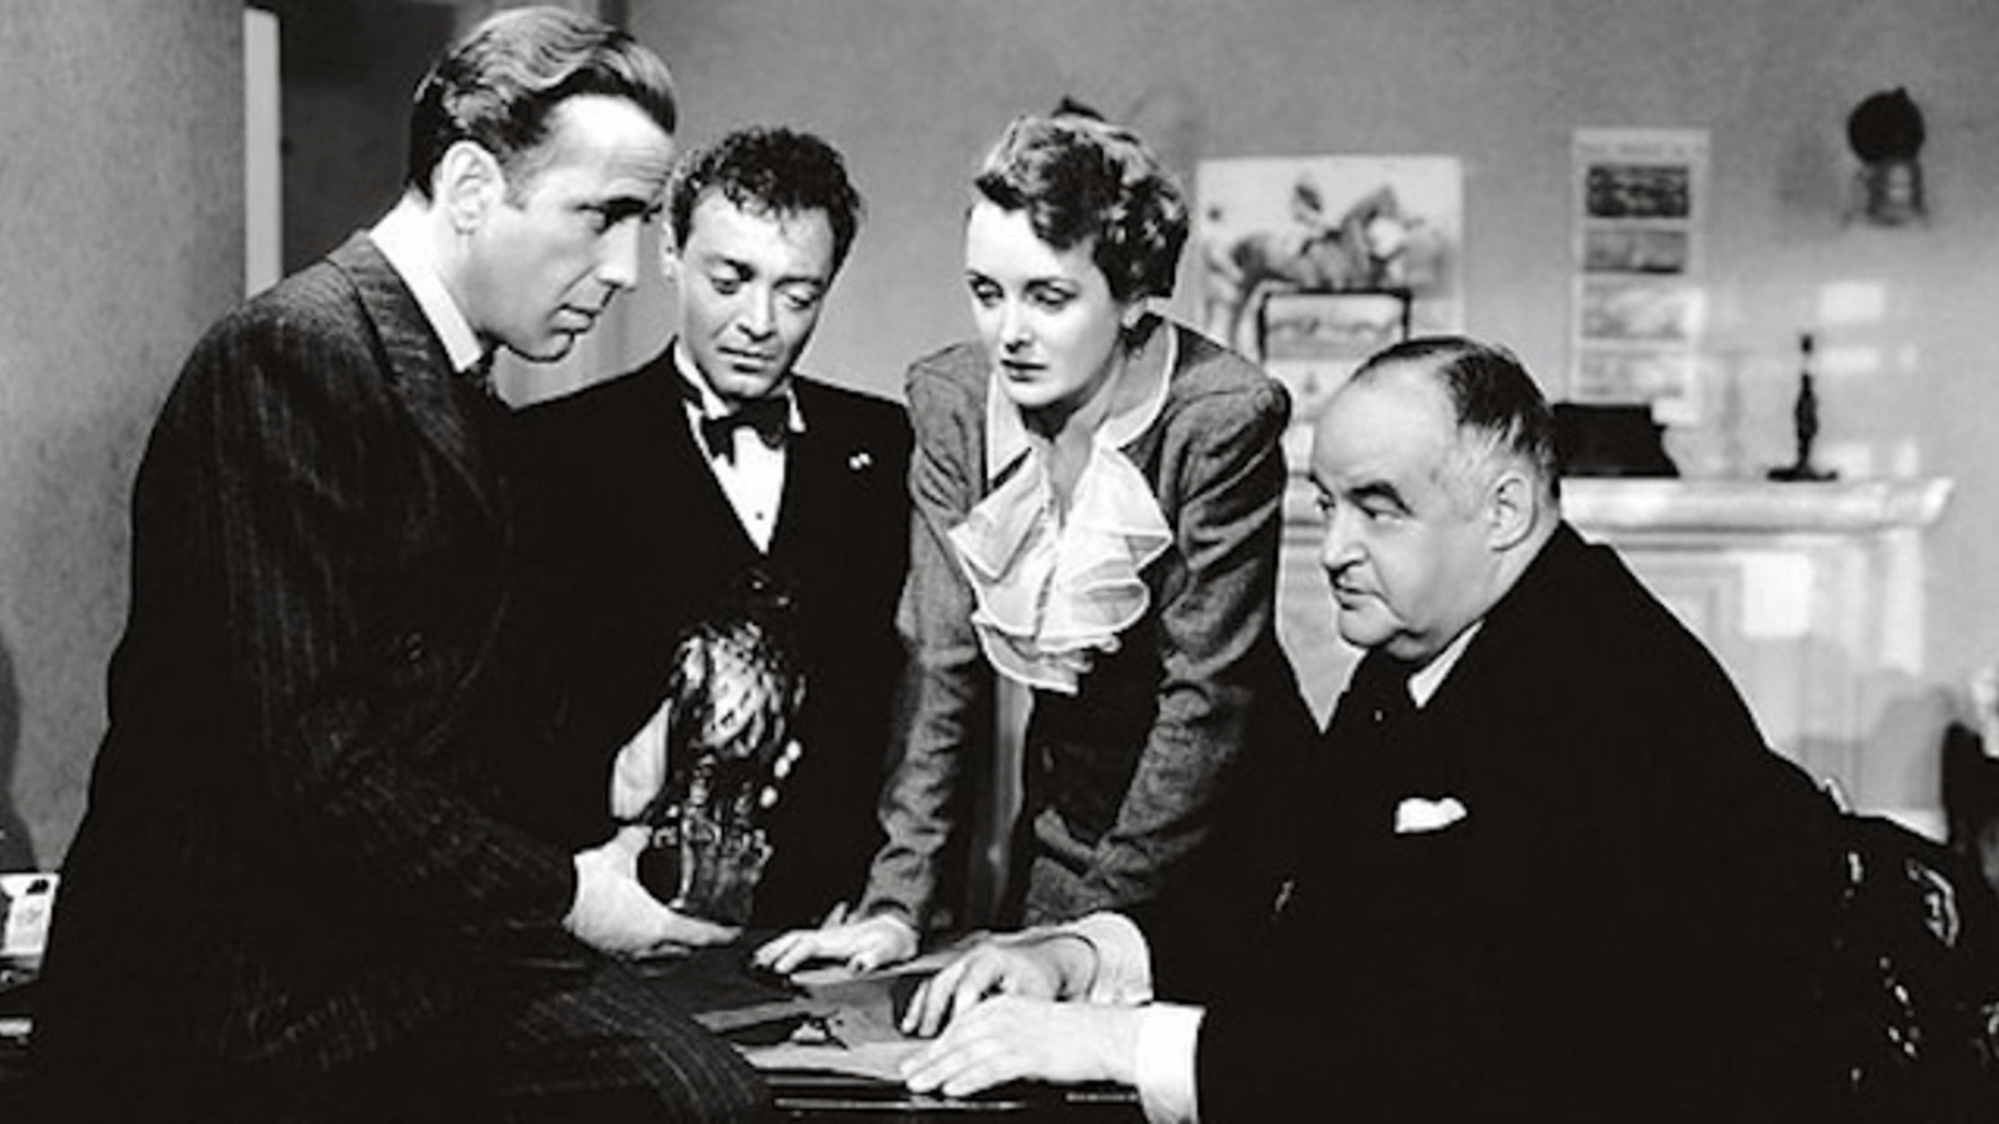 A still of the main cast from the film The Maltese Falcon.